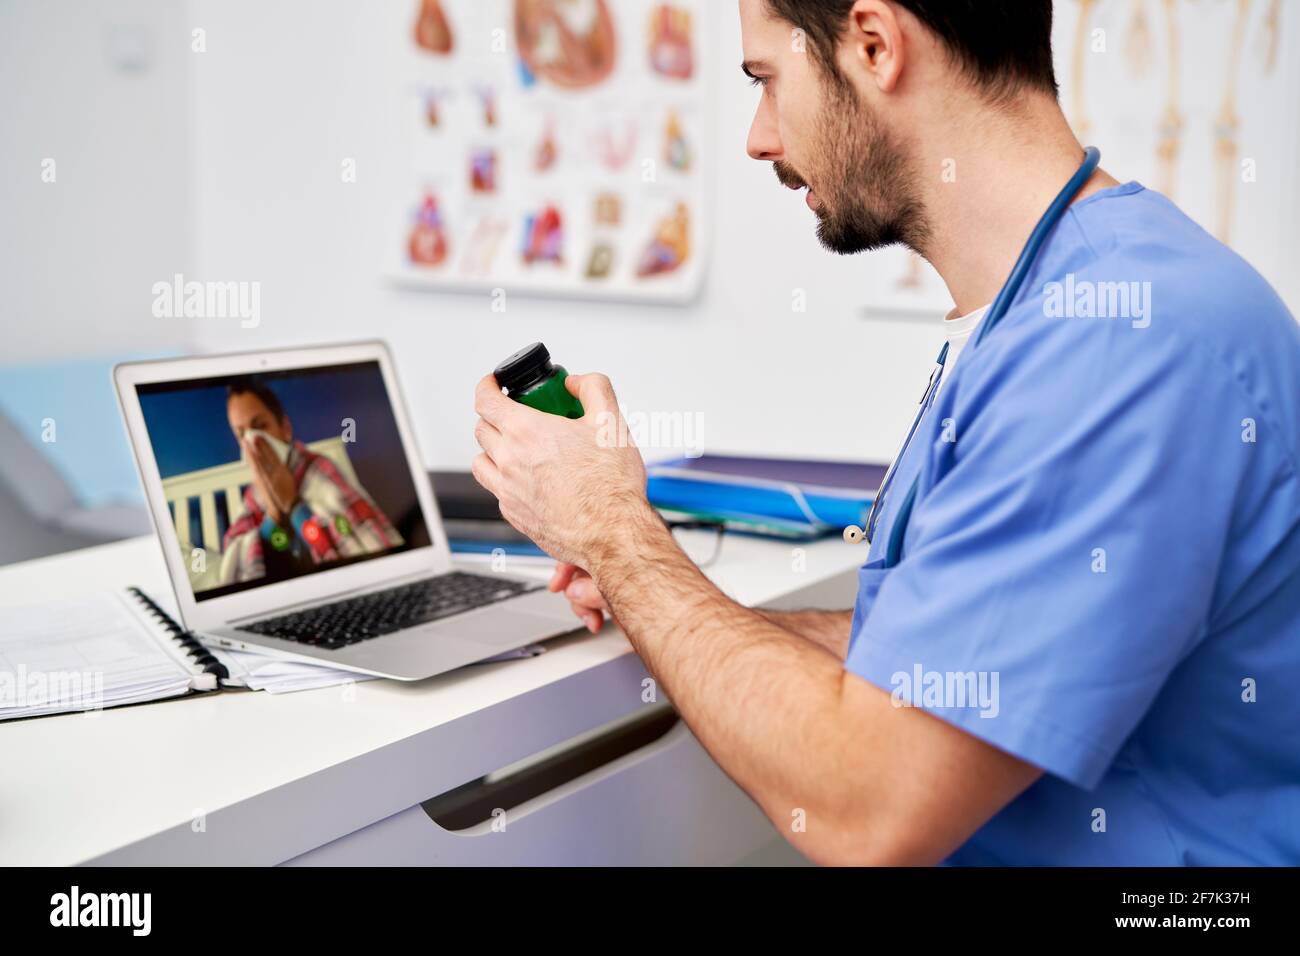 Sick patient on a video call with a doctor Stock Photo